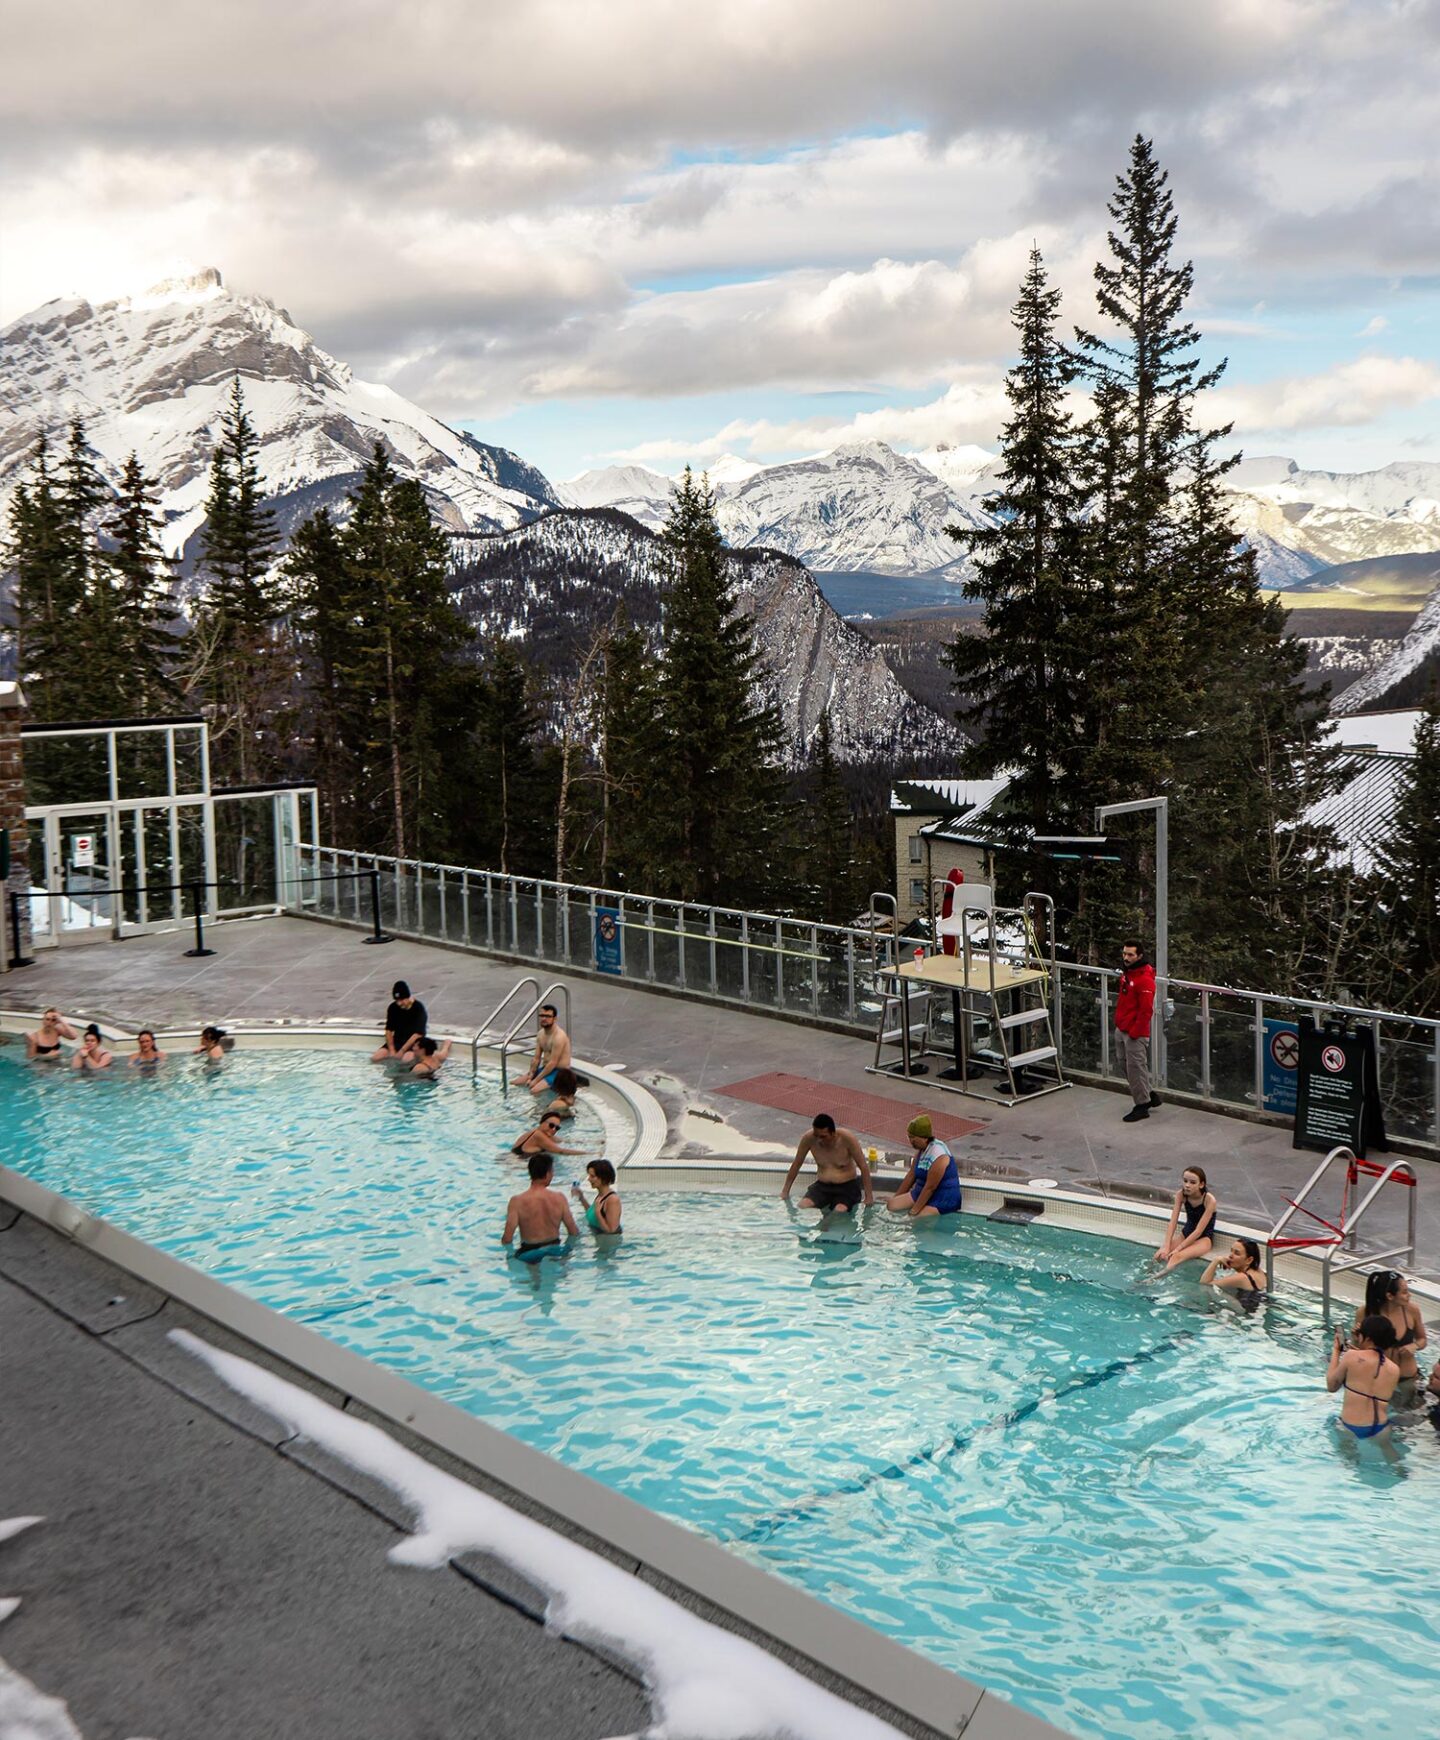 A small group of people are bathing in a natural hot spring pool, from the balcony of this pool you can see snow capped mountains in the background